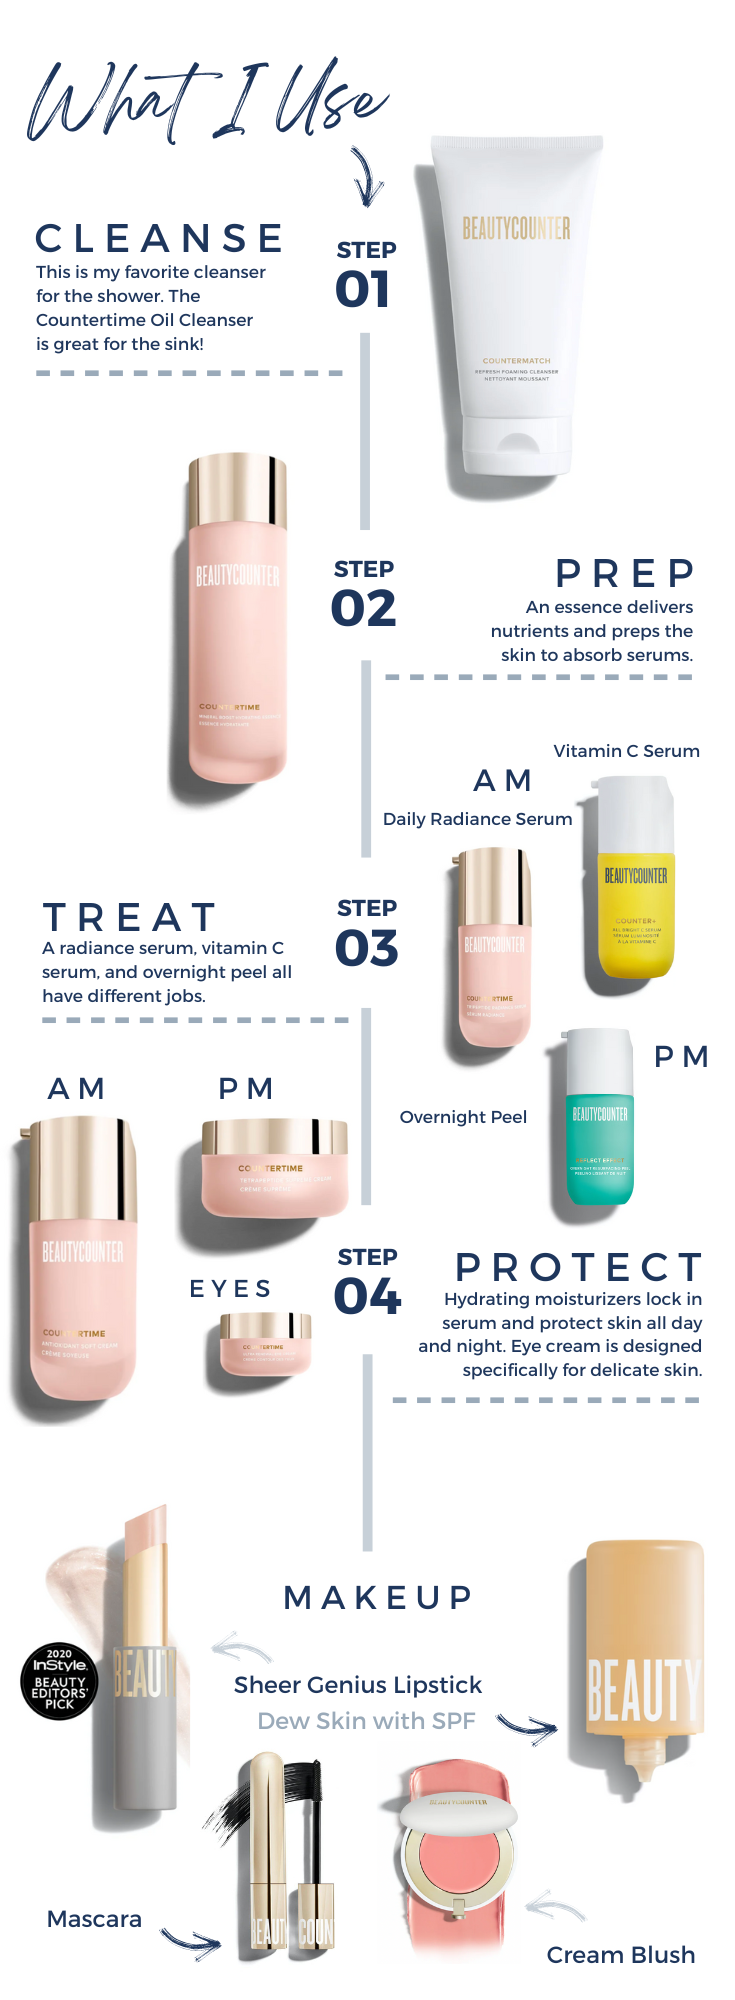 How to Apply Skincare Products in the Right Order